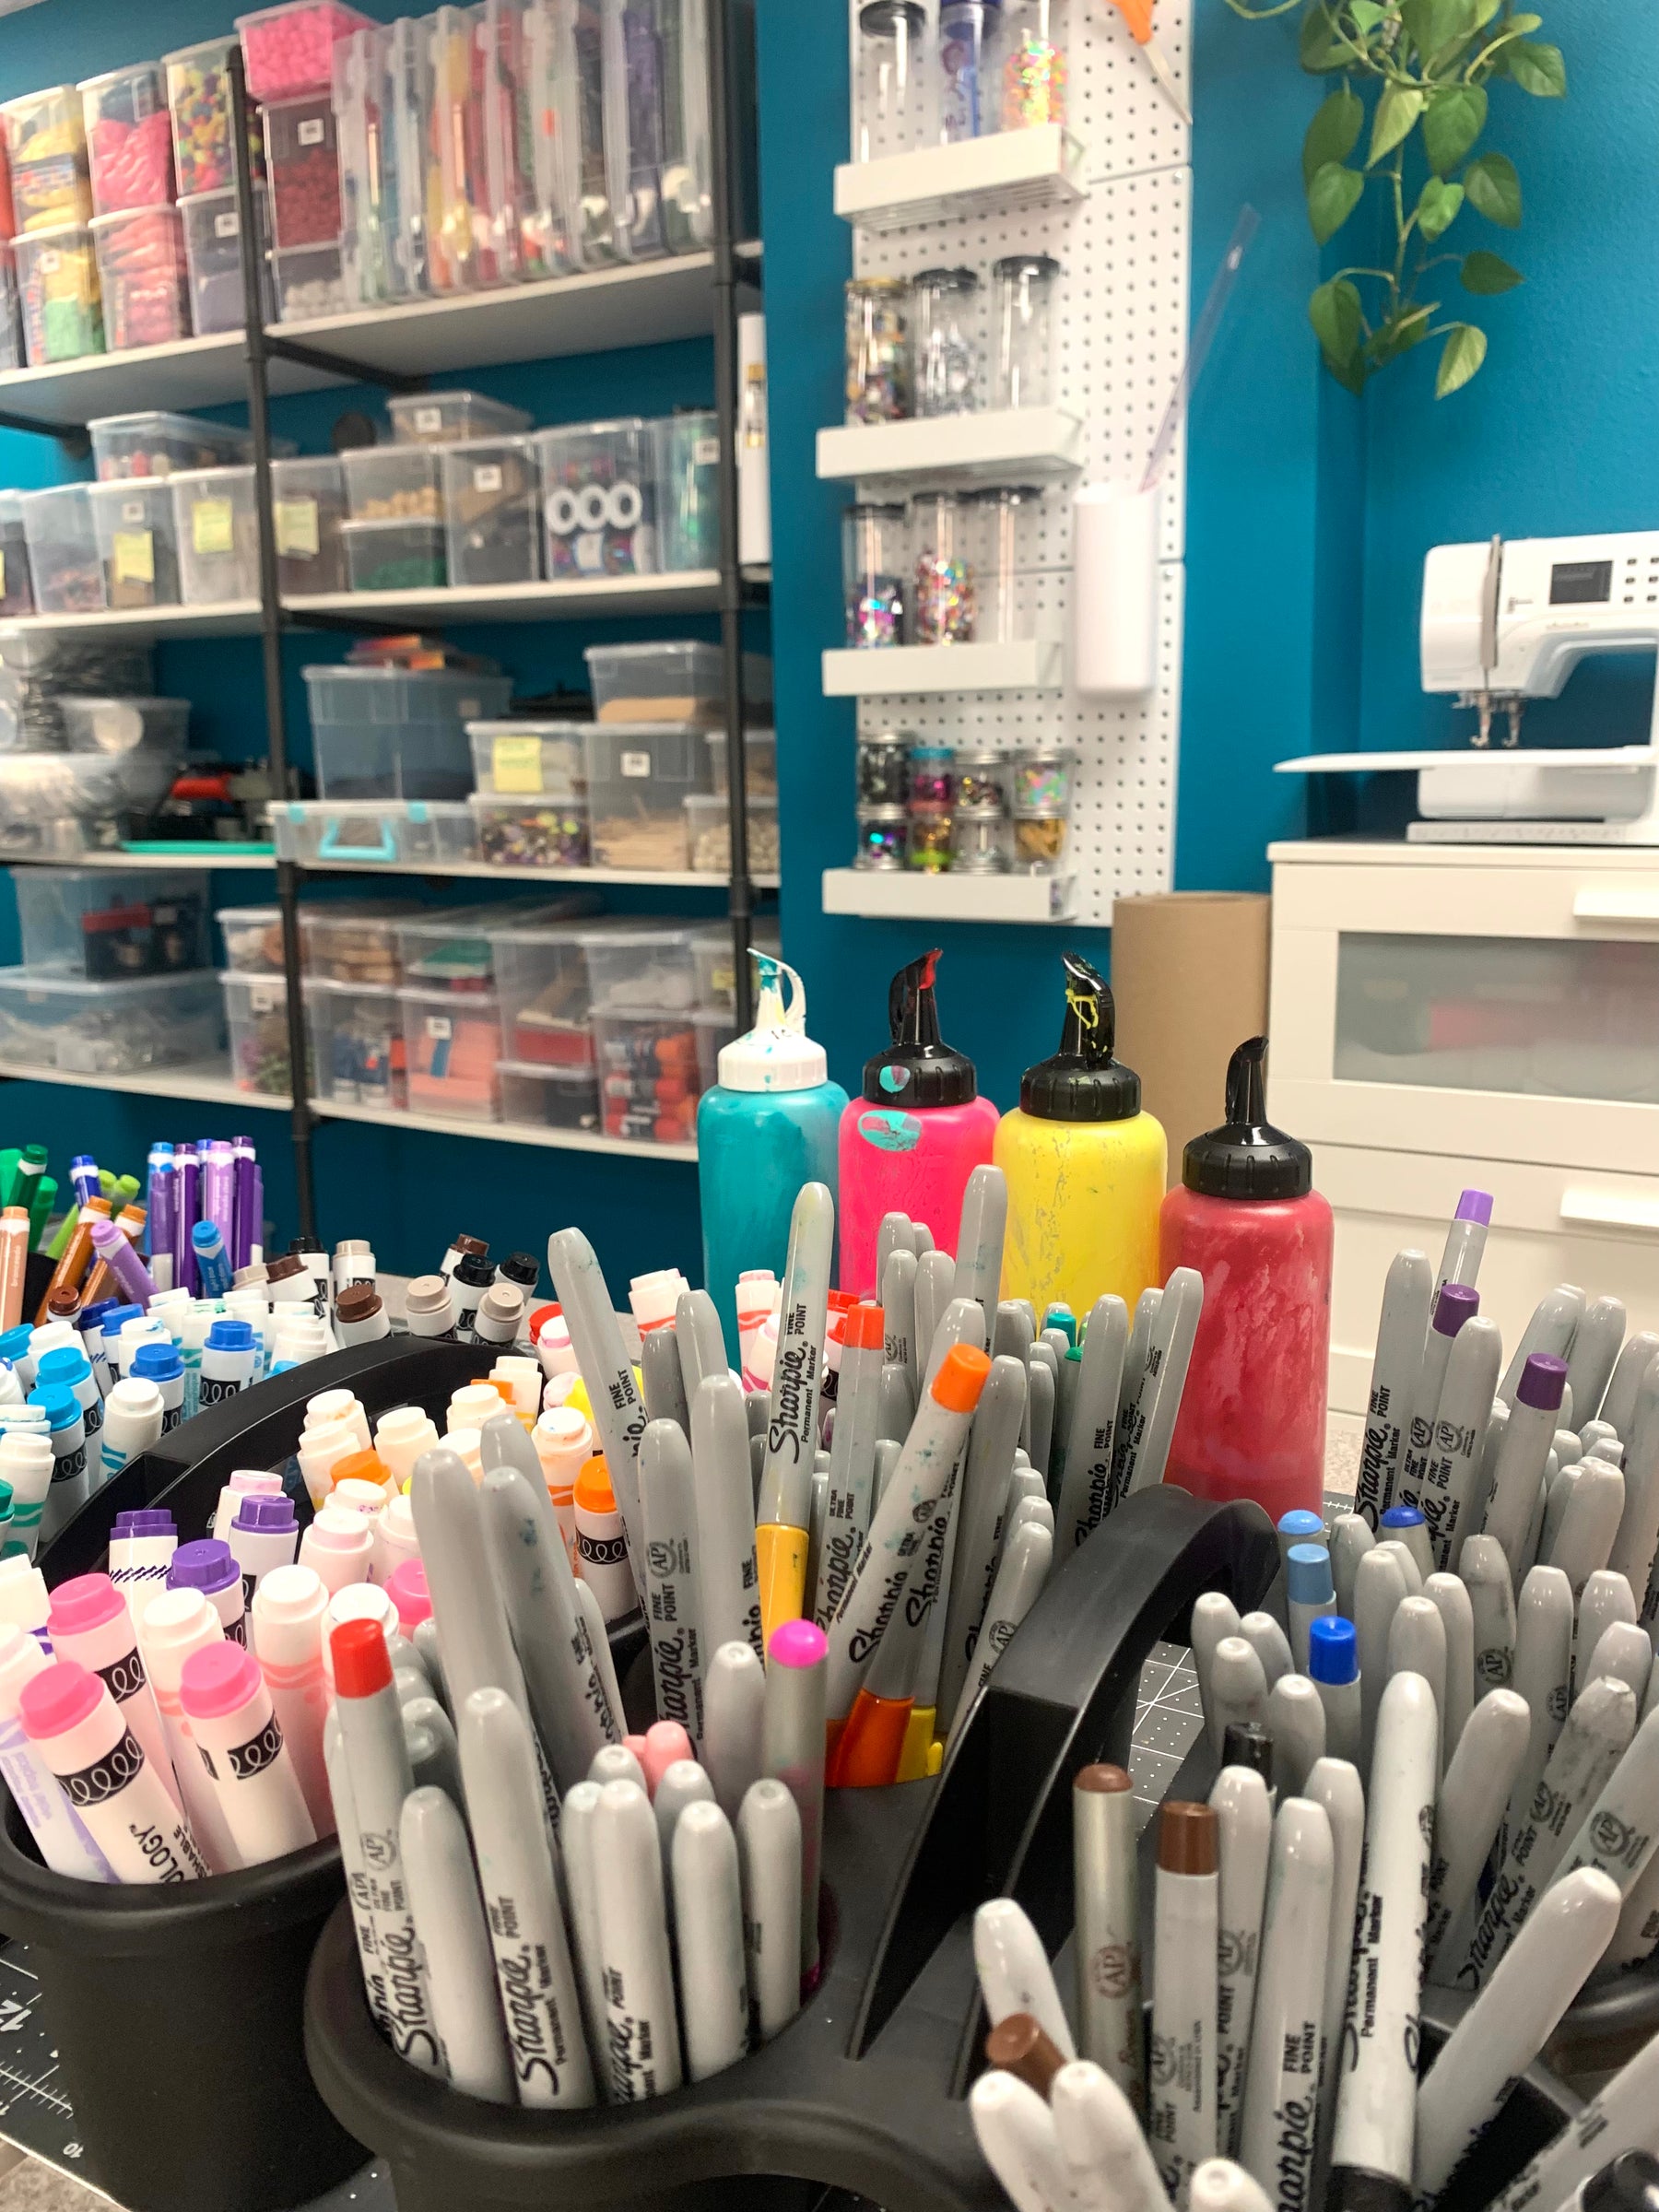 markers and sharpies in cups with paint bottles on a table. Shelves with storage for creative supplies are in the background